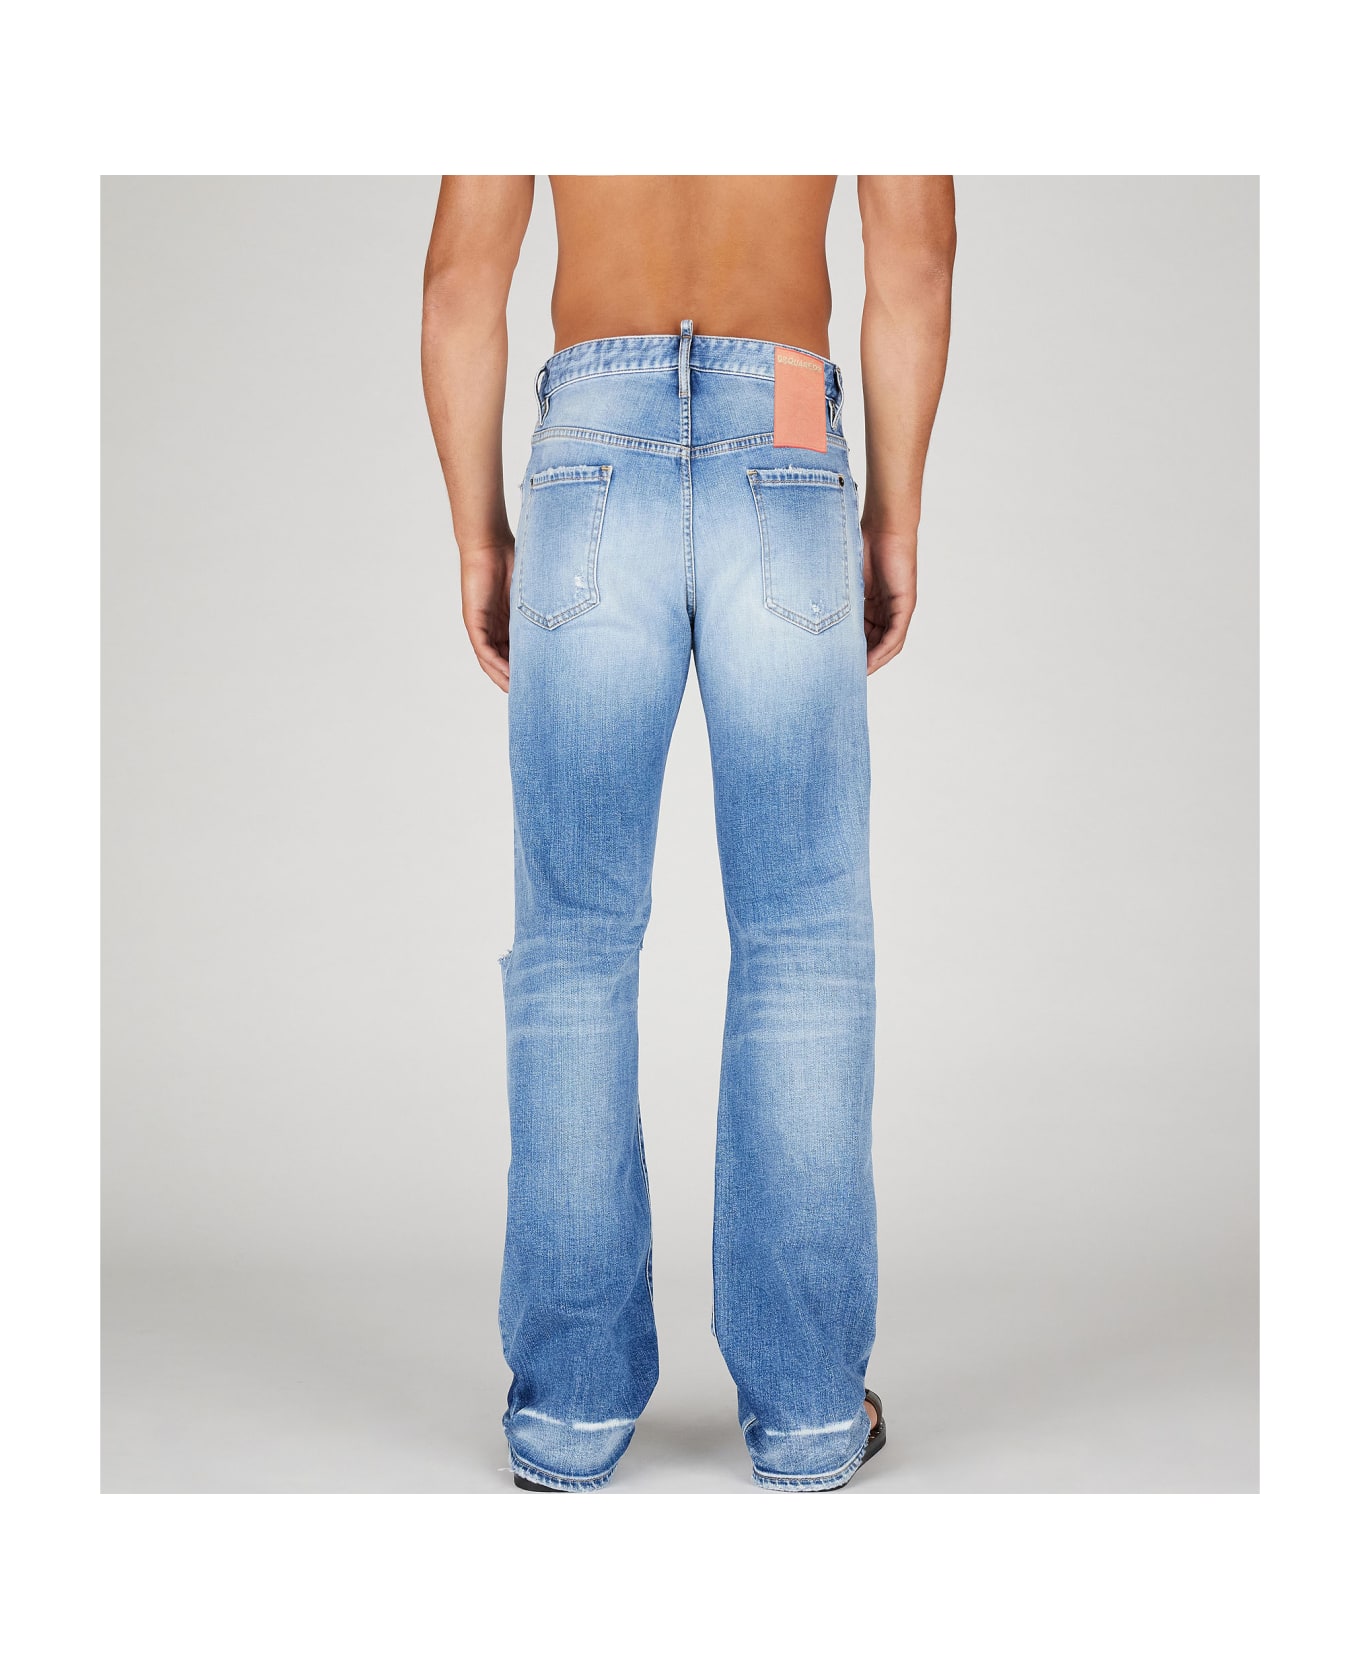 Dsquared2 'roadie' Jeans - Navy blue